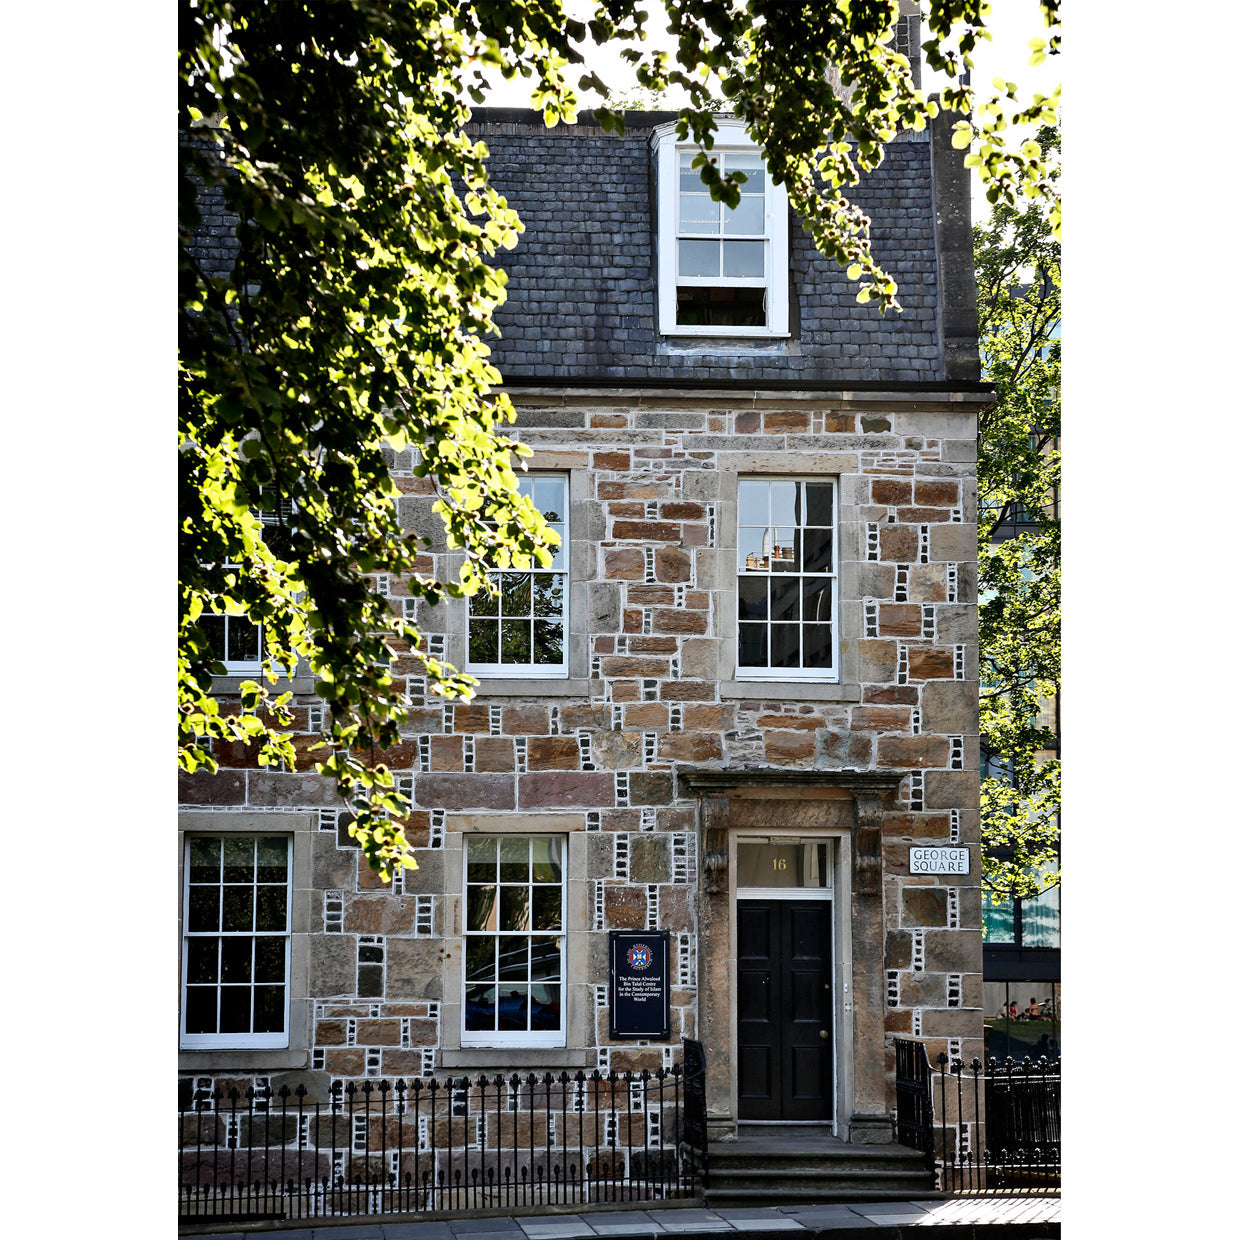 Photograph of a georgian house on george square